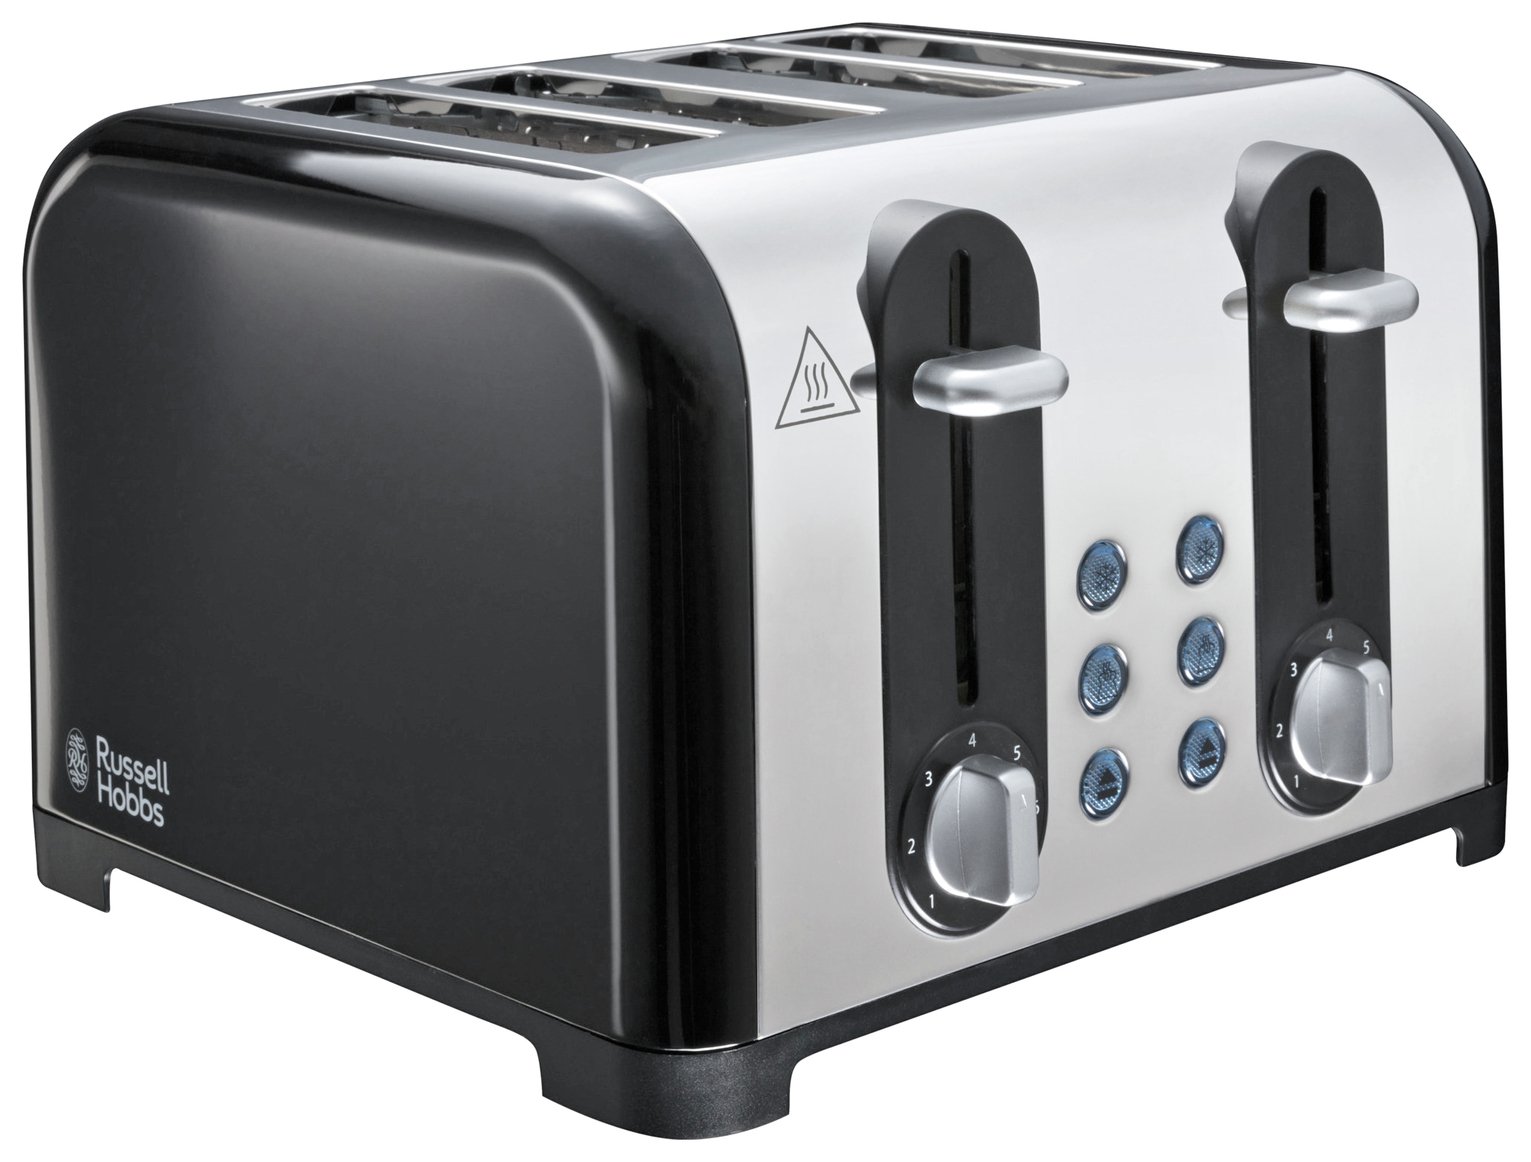 Russell Hobbs 22407 Worcester 4 Slice Toaster Review